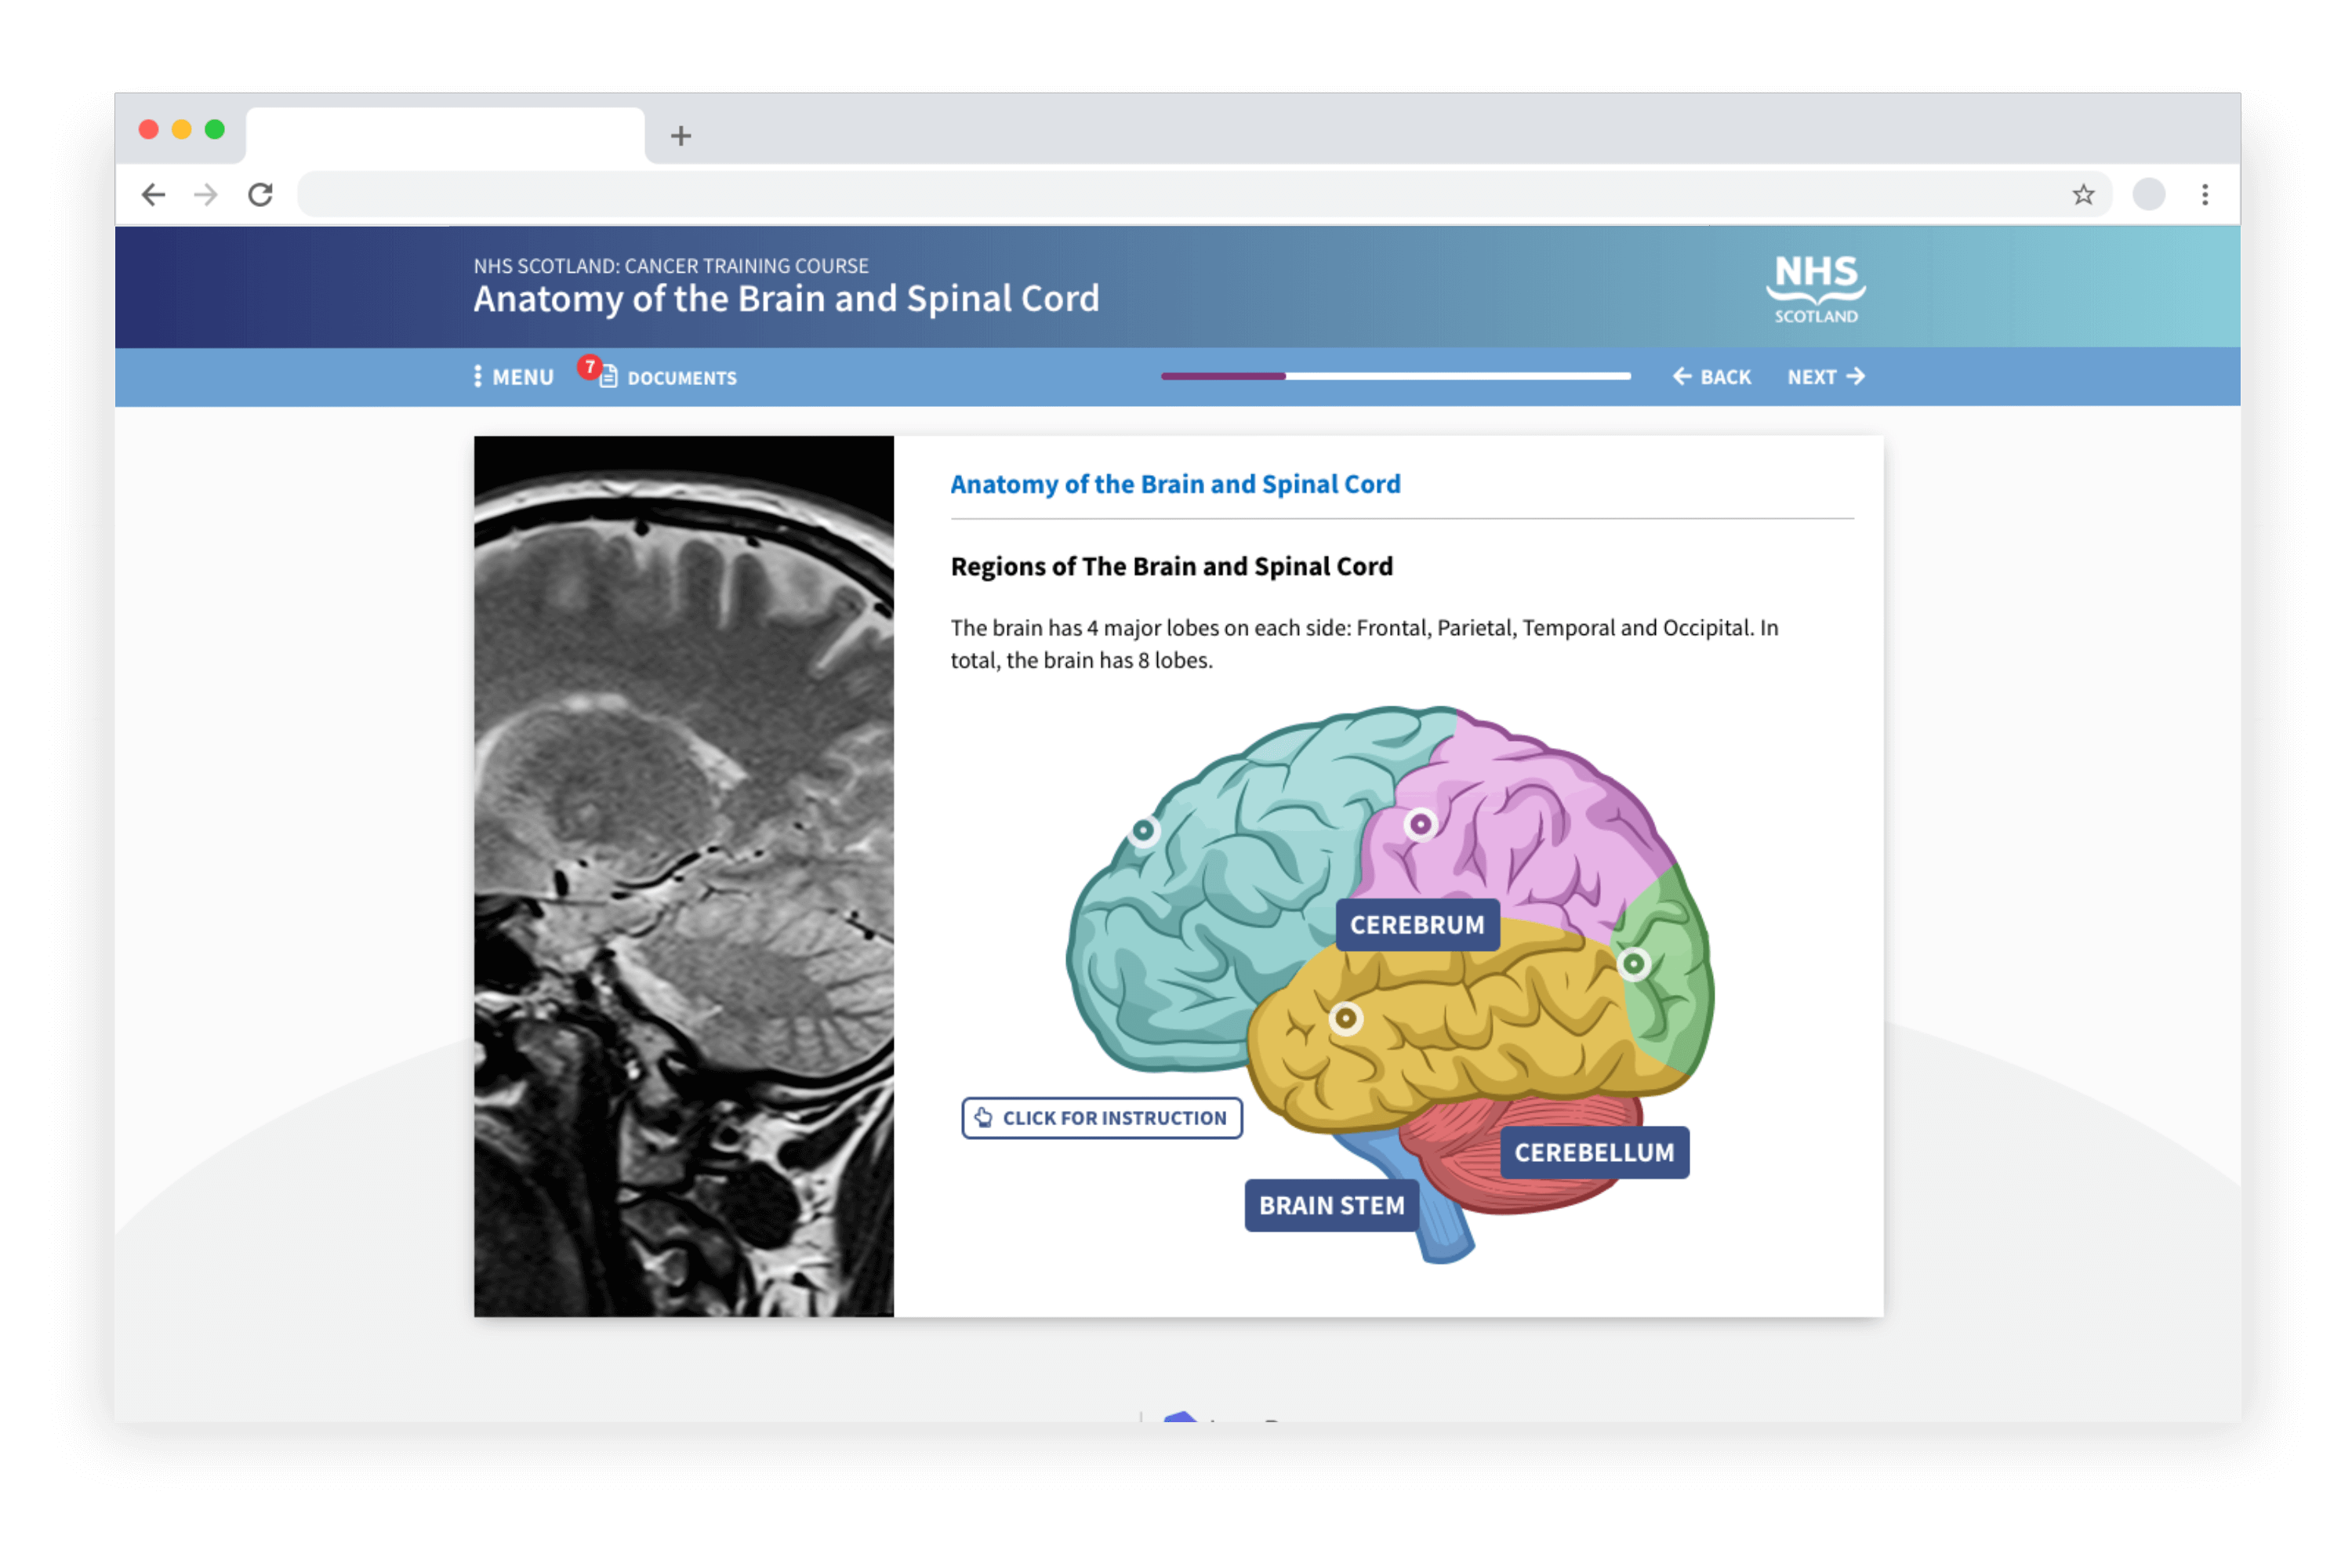 Example e-learning showing an Anatomy of the Brain and Spinal Cord course developed in LAB Advanced